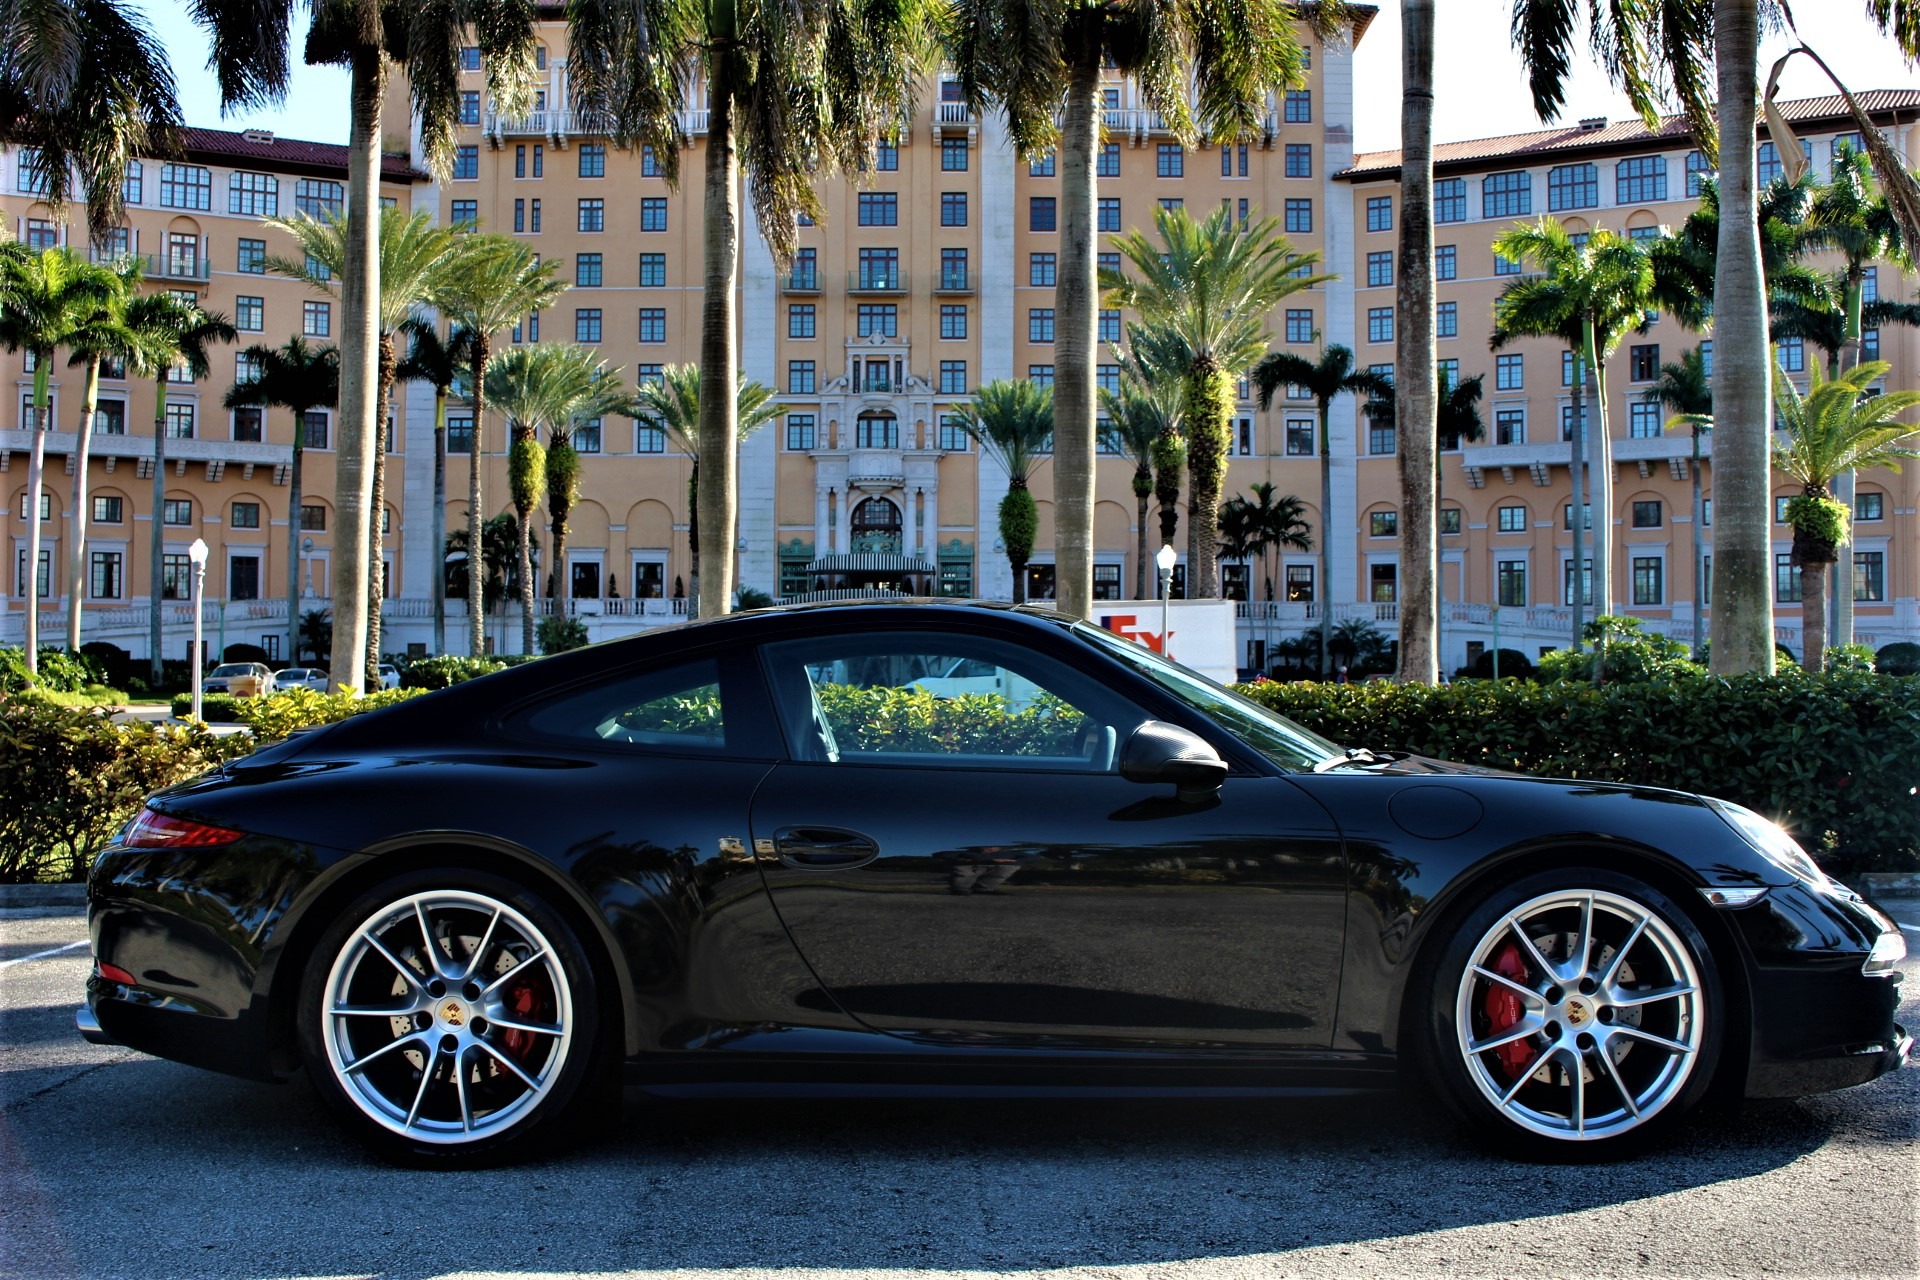 Used 2014 Porsche 911 Carrera 4S for sale Sold at The Gables Sports Cars in Miami FL 33146 3